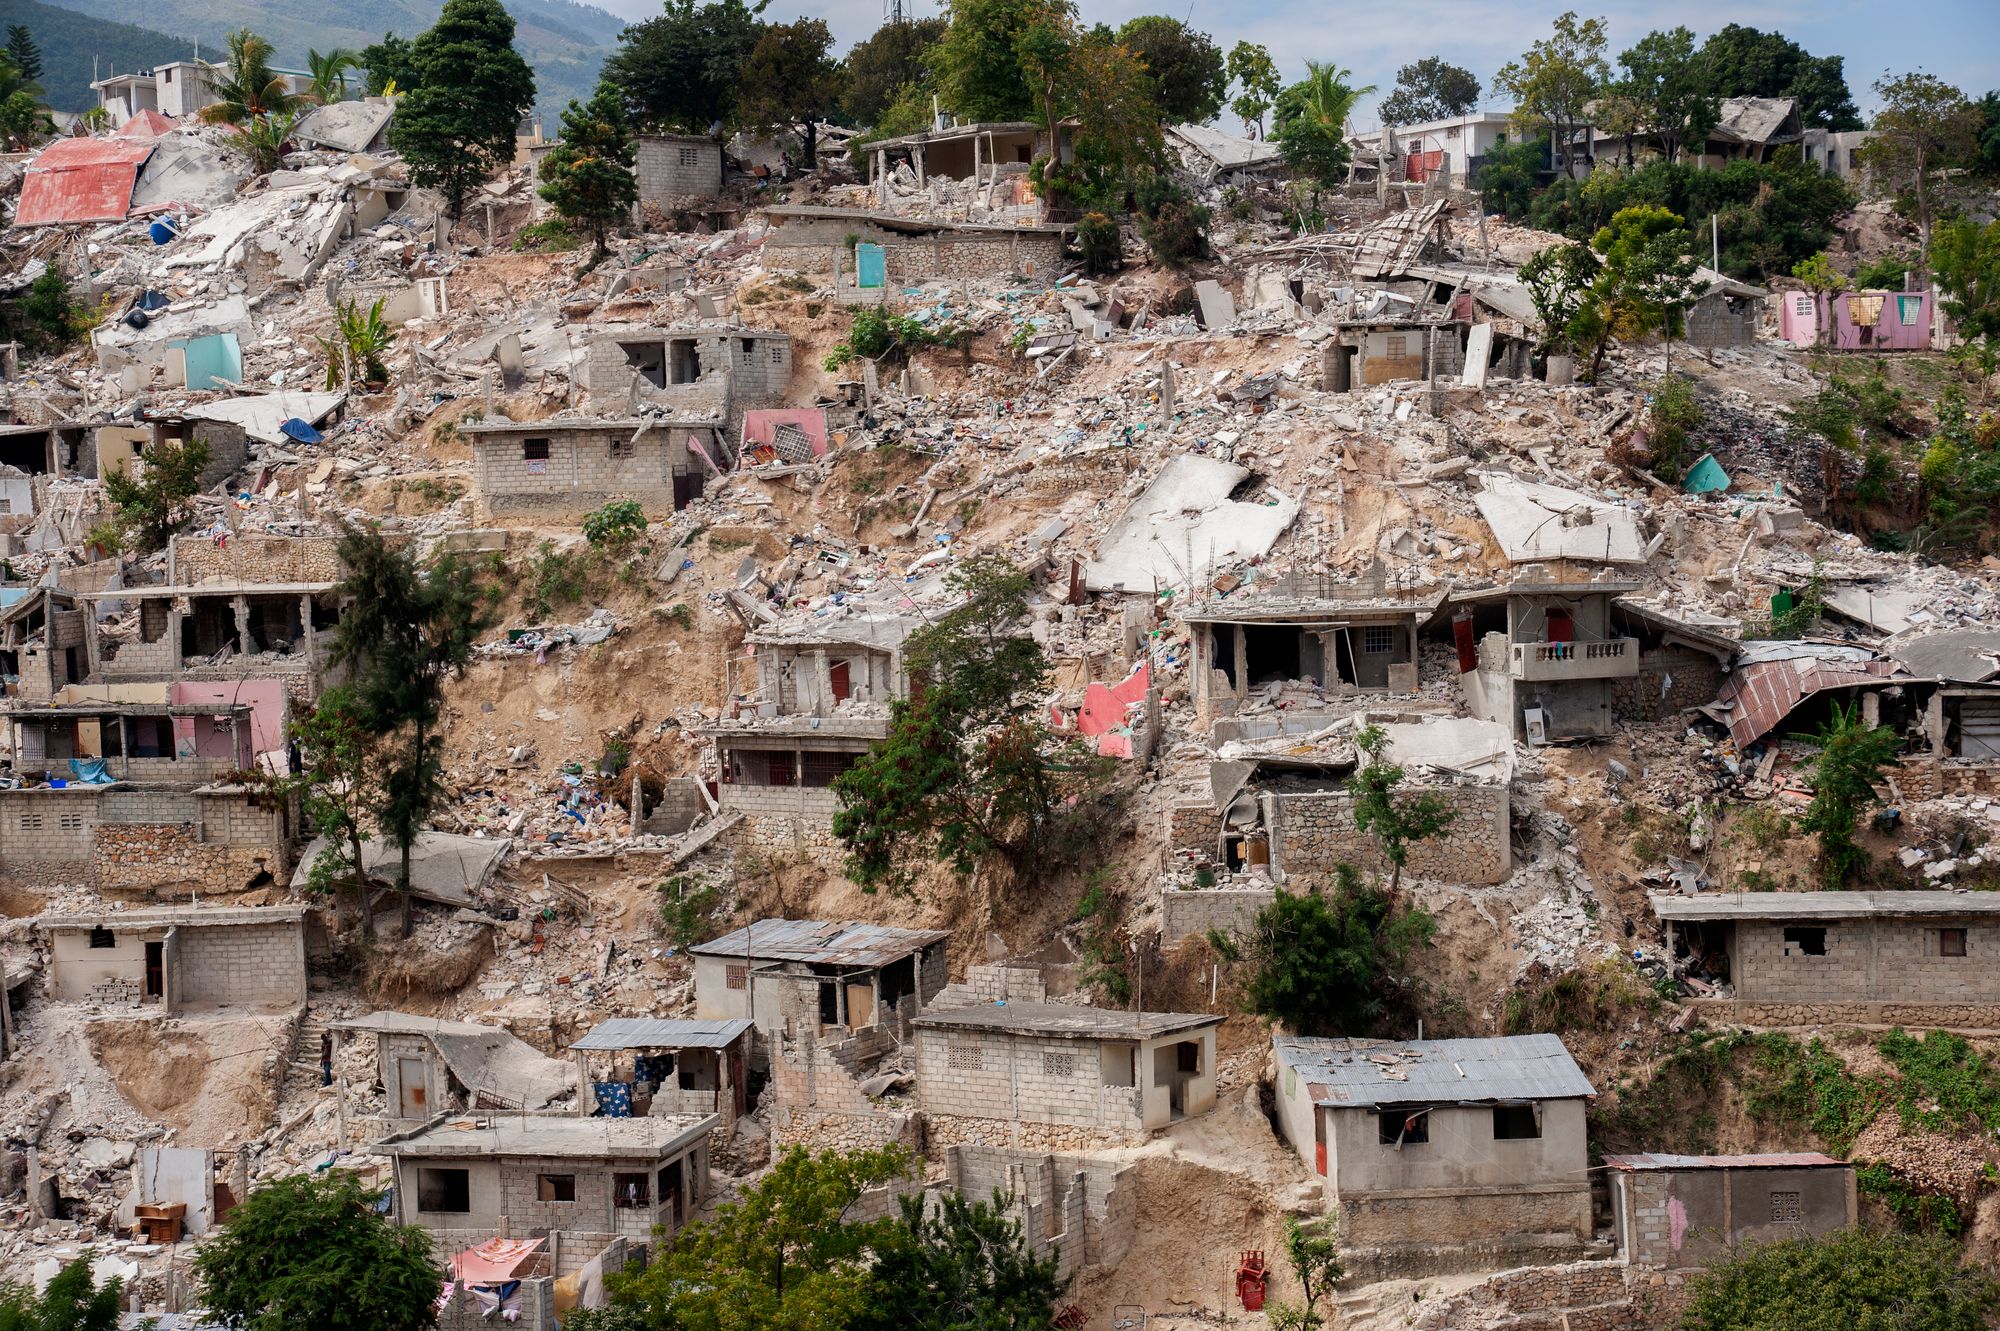 A hillside littered with crumbled houses and fallen trees